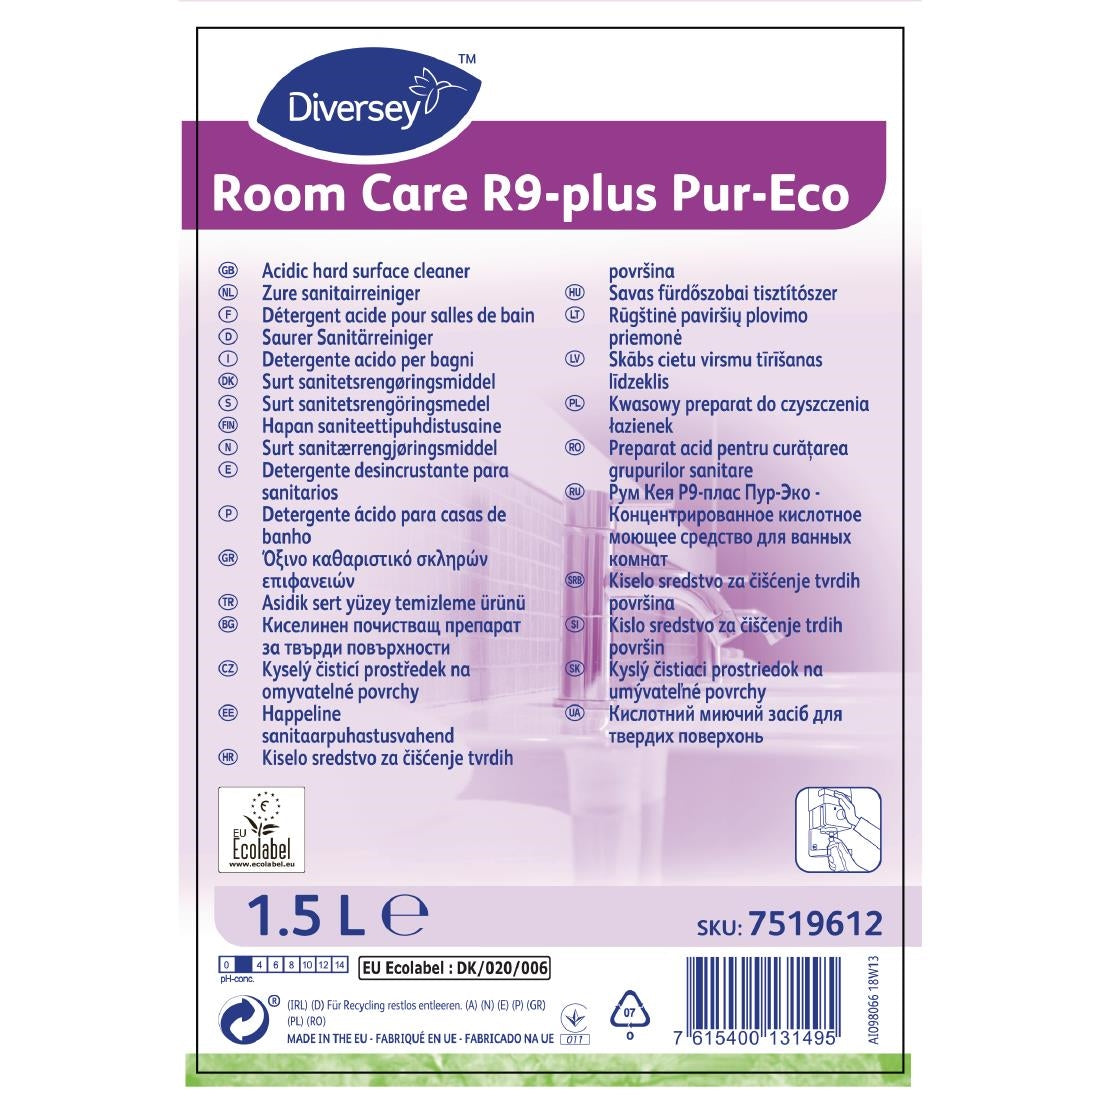 CX814 Room Care R9-plus Pur-Eco Bathroom Cleaner Concentrate 1.5Ltr JD Catering Equipment Solutions Ltd